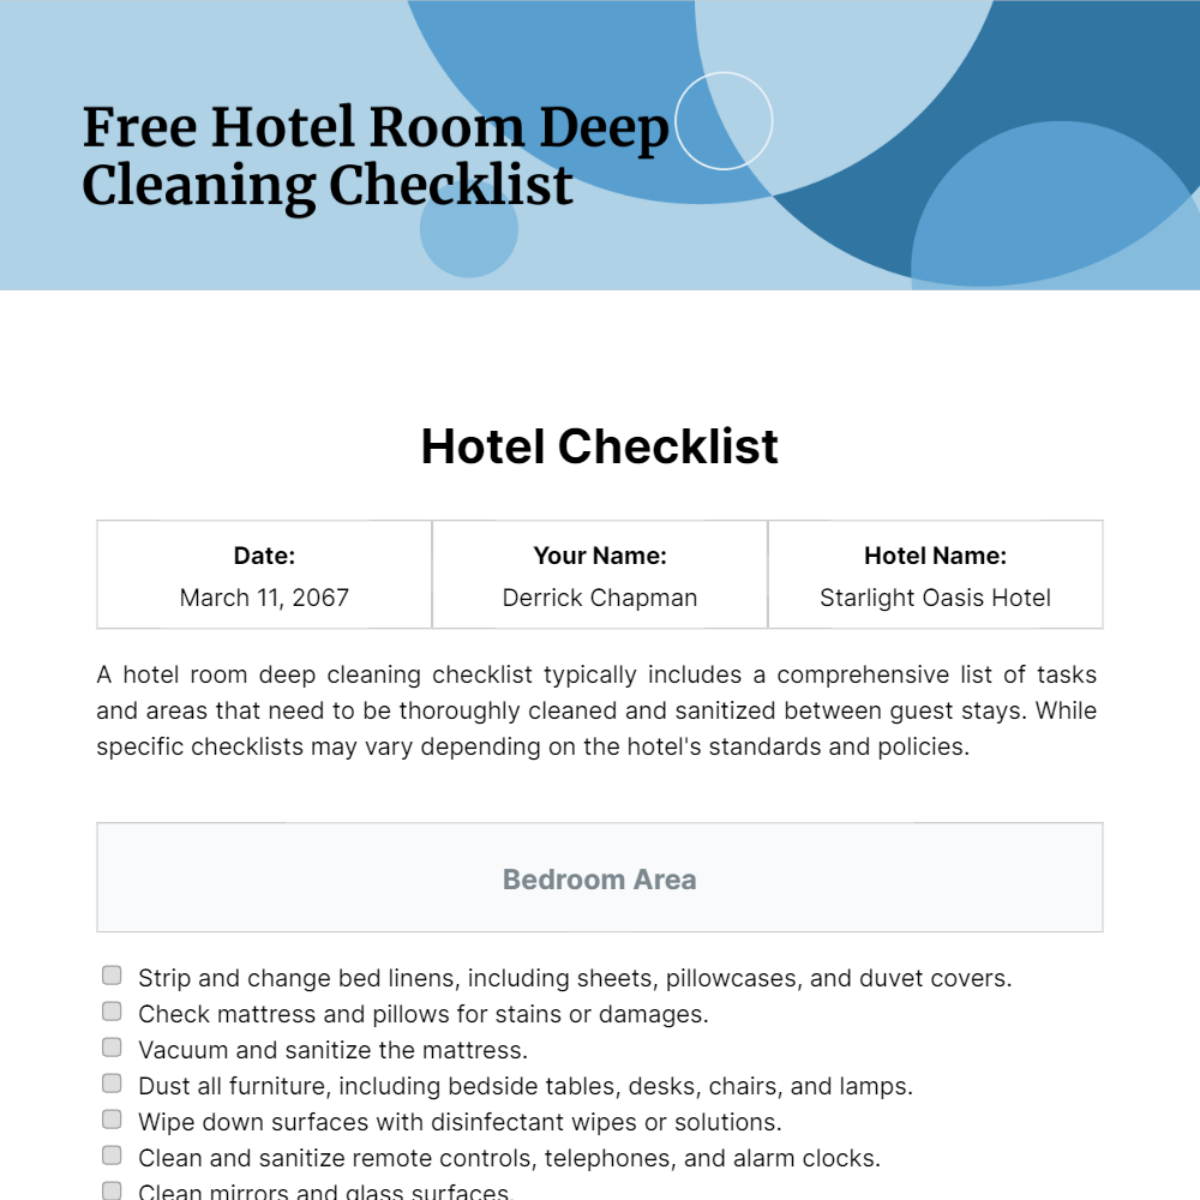 Free Hotel Room Deep Cleaning Checklist Template